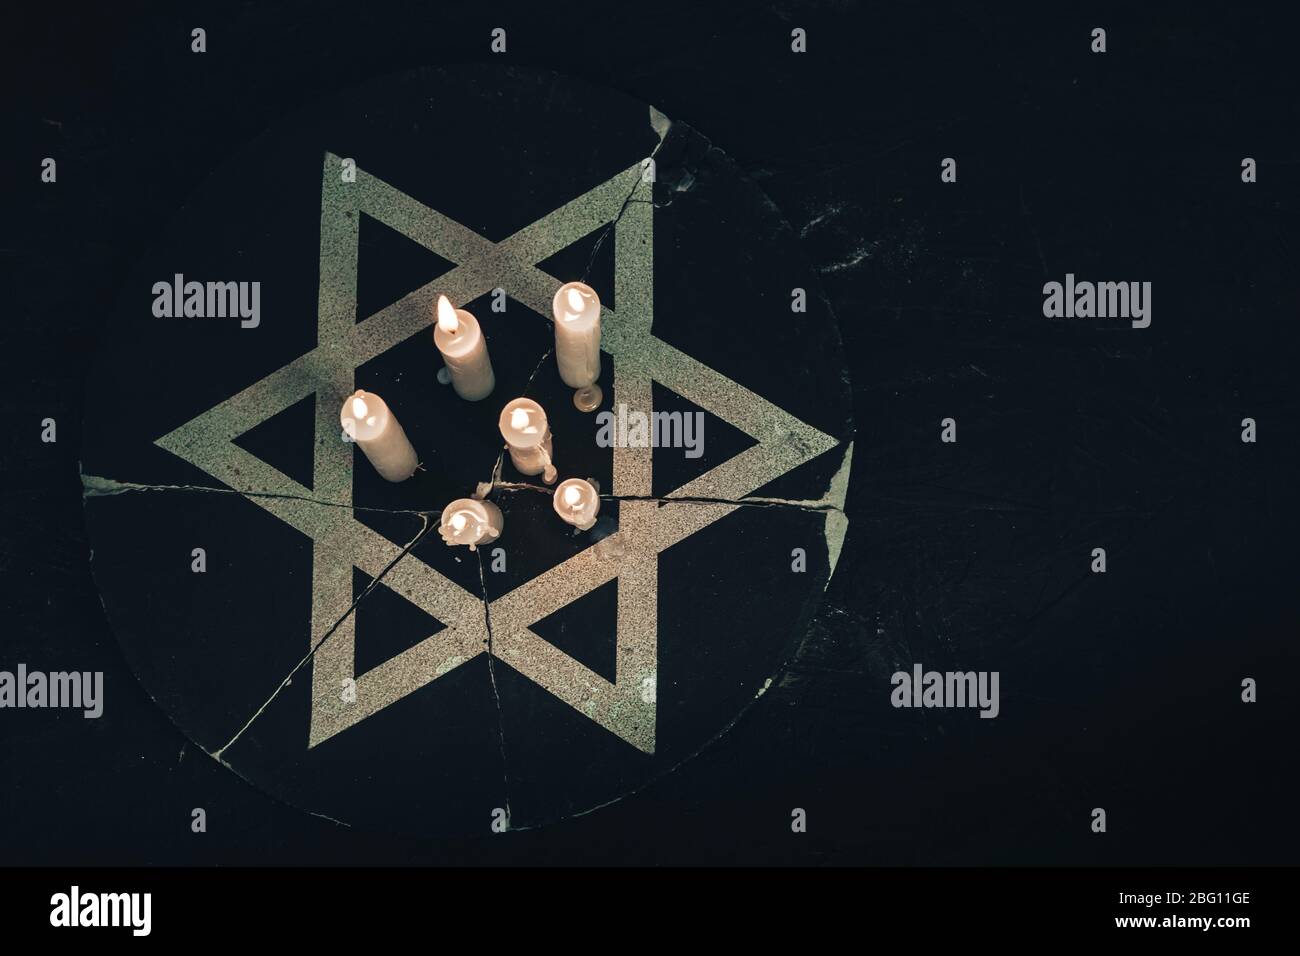 Six burning candles and the Star of David against on a black background. Stock Photo